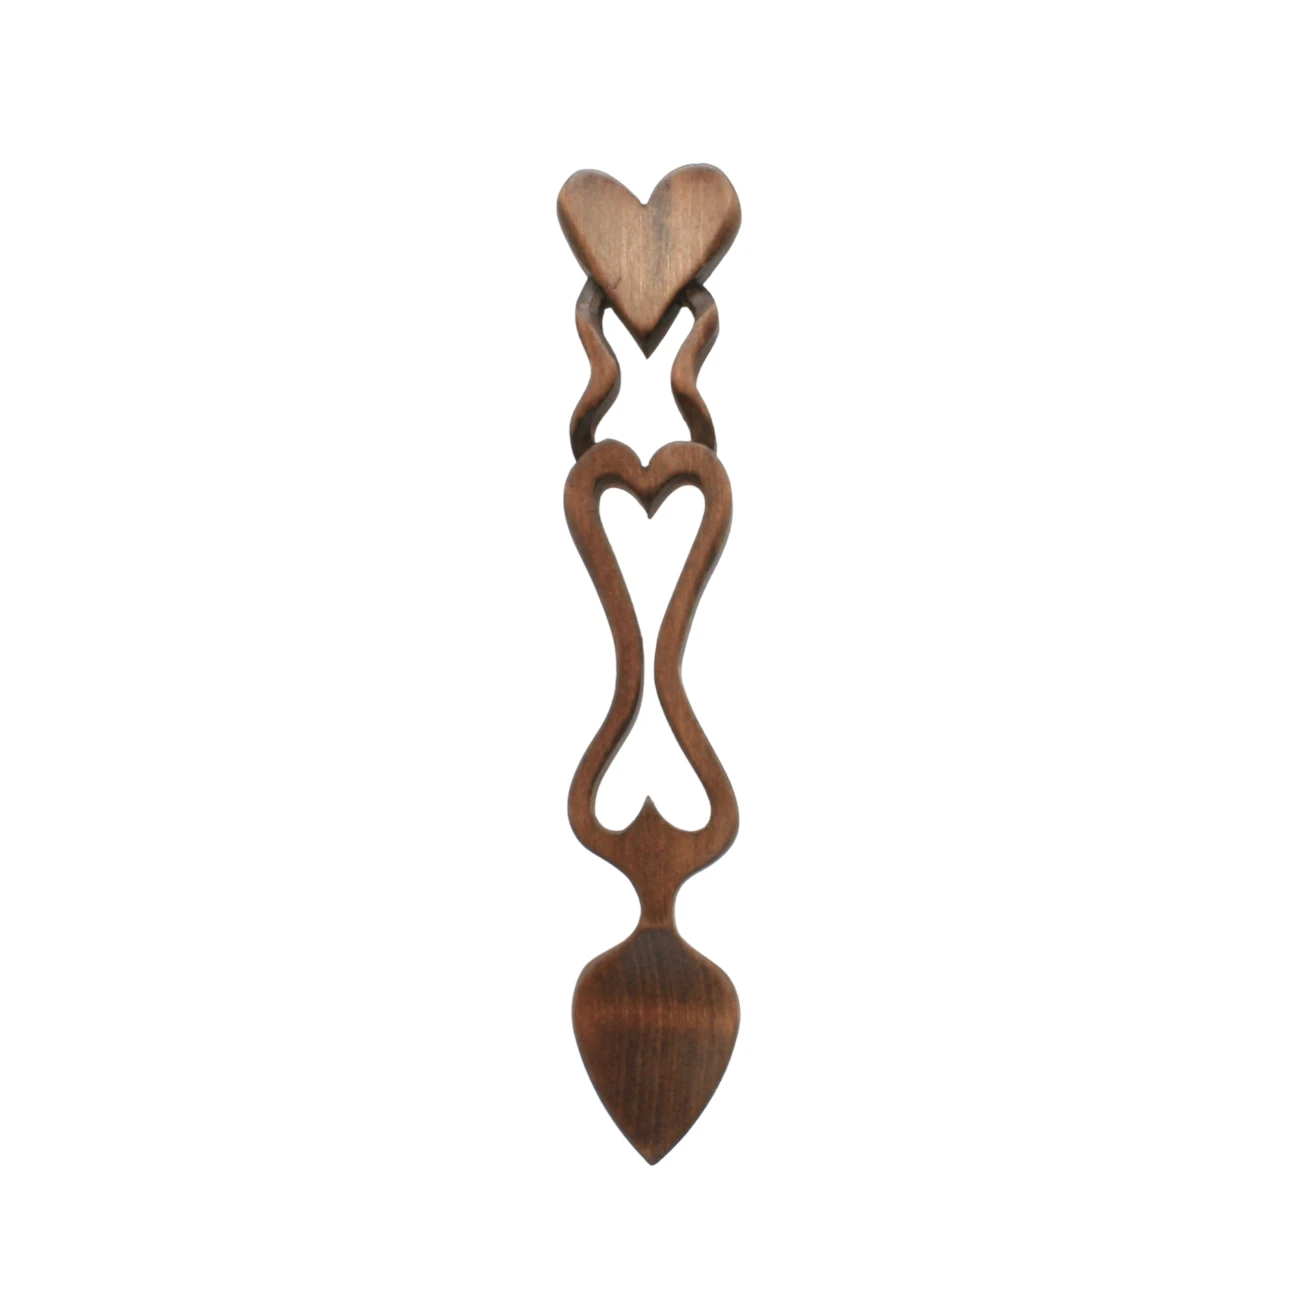 An image of a lovespoon titled Hearts